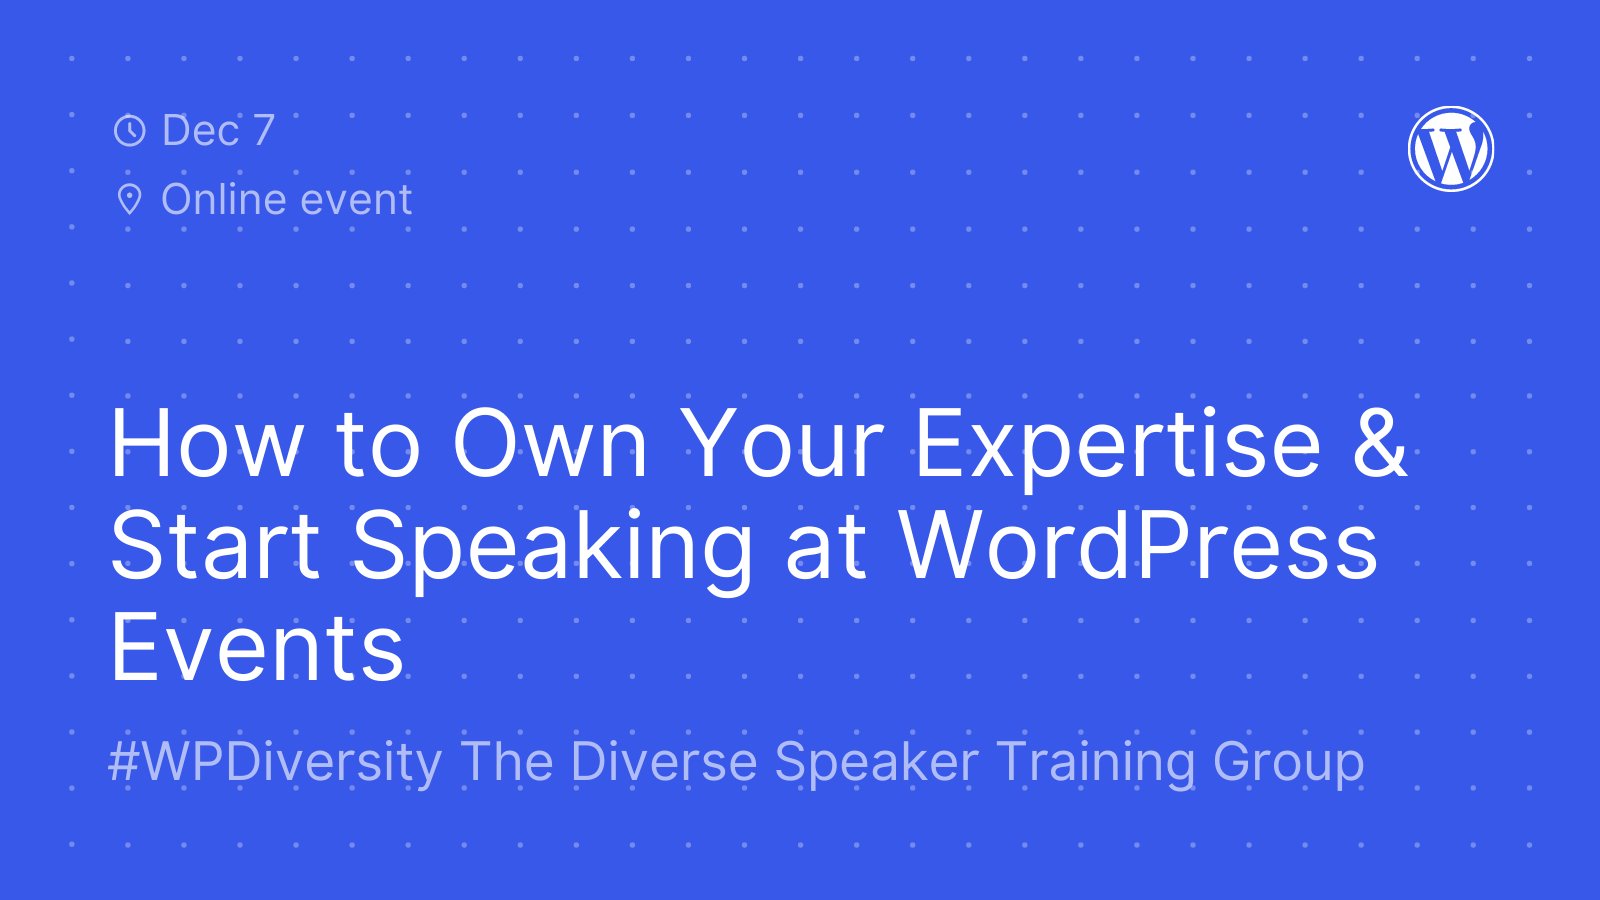 Blue background with white dot detail and text, "How to Own Your Expertise & Start Speaking at WordPress Events. WP Diversity. The Diverse Speaker Training Group."